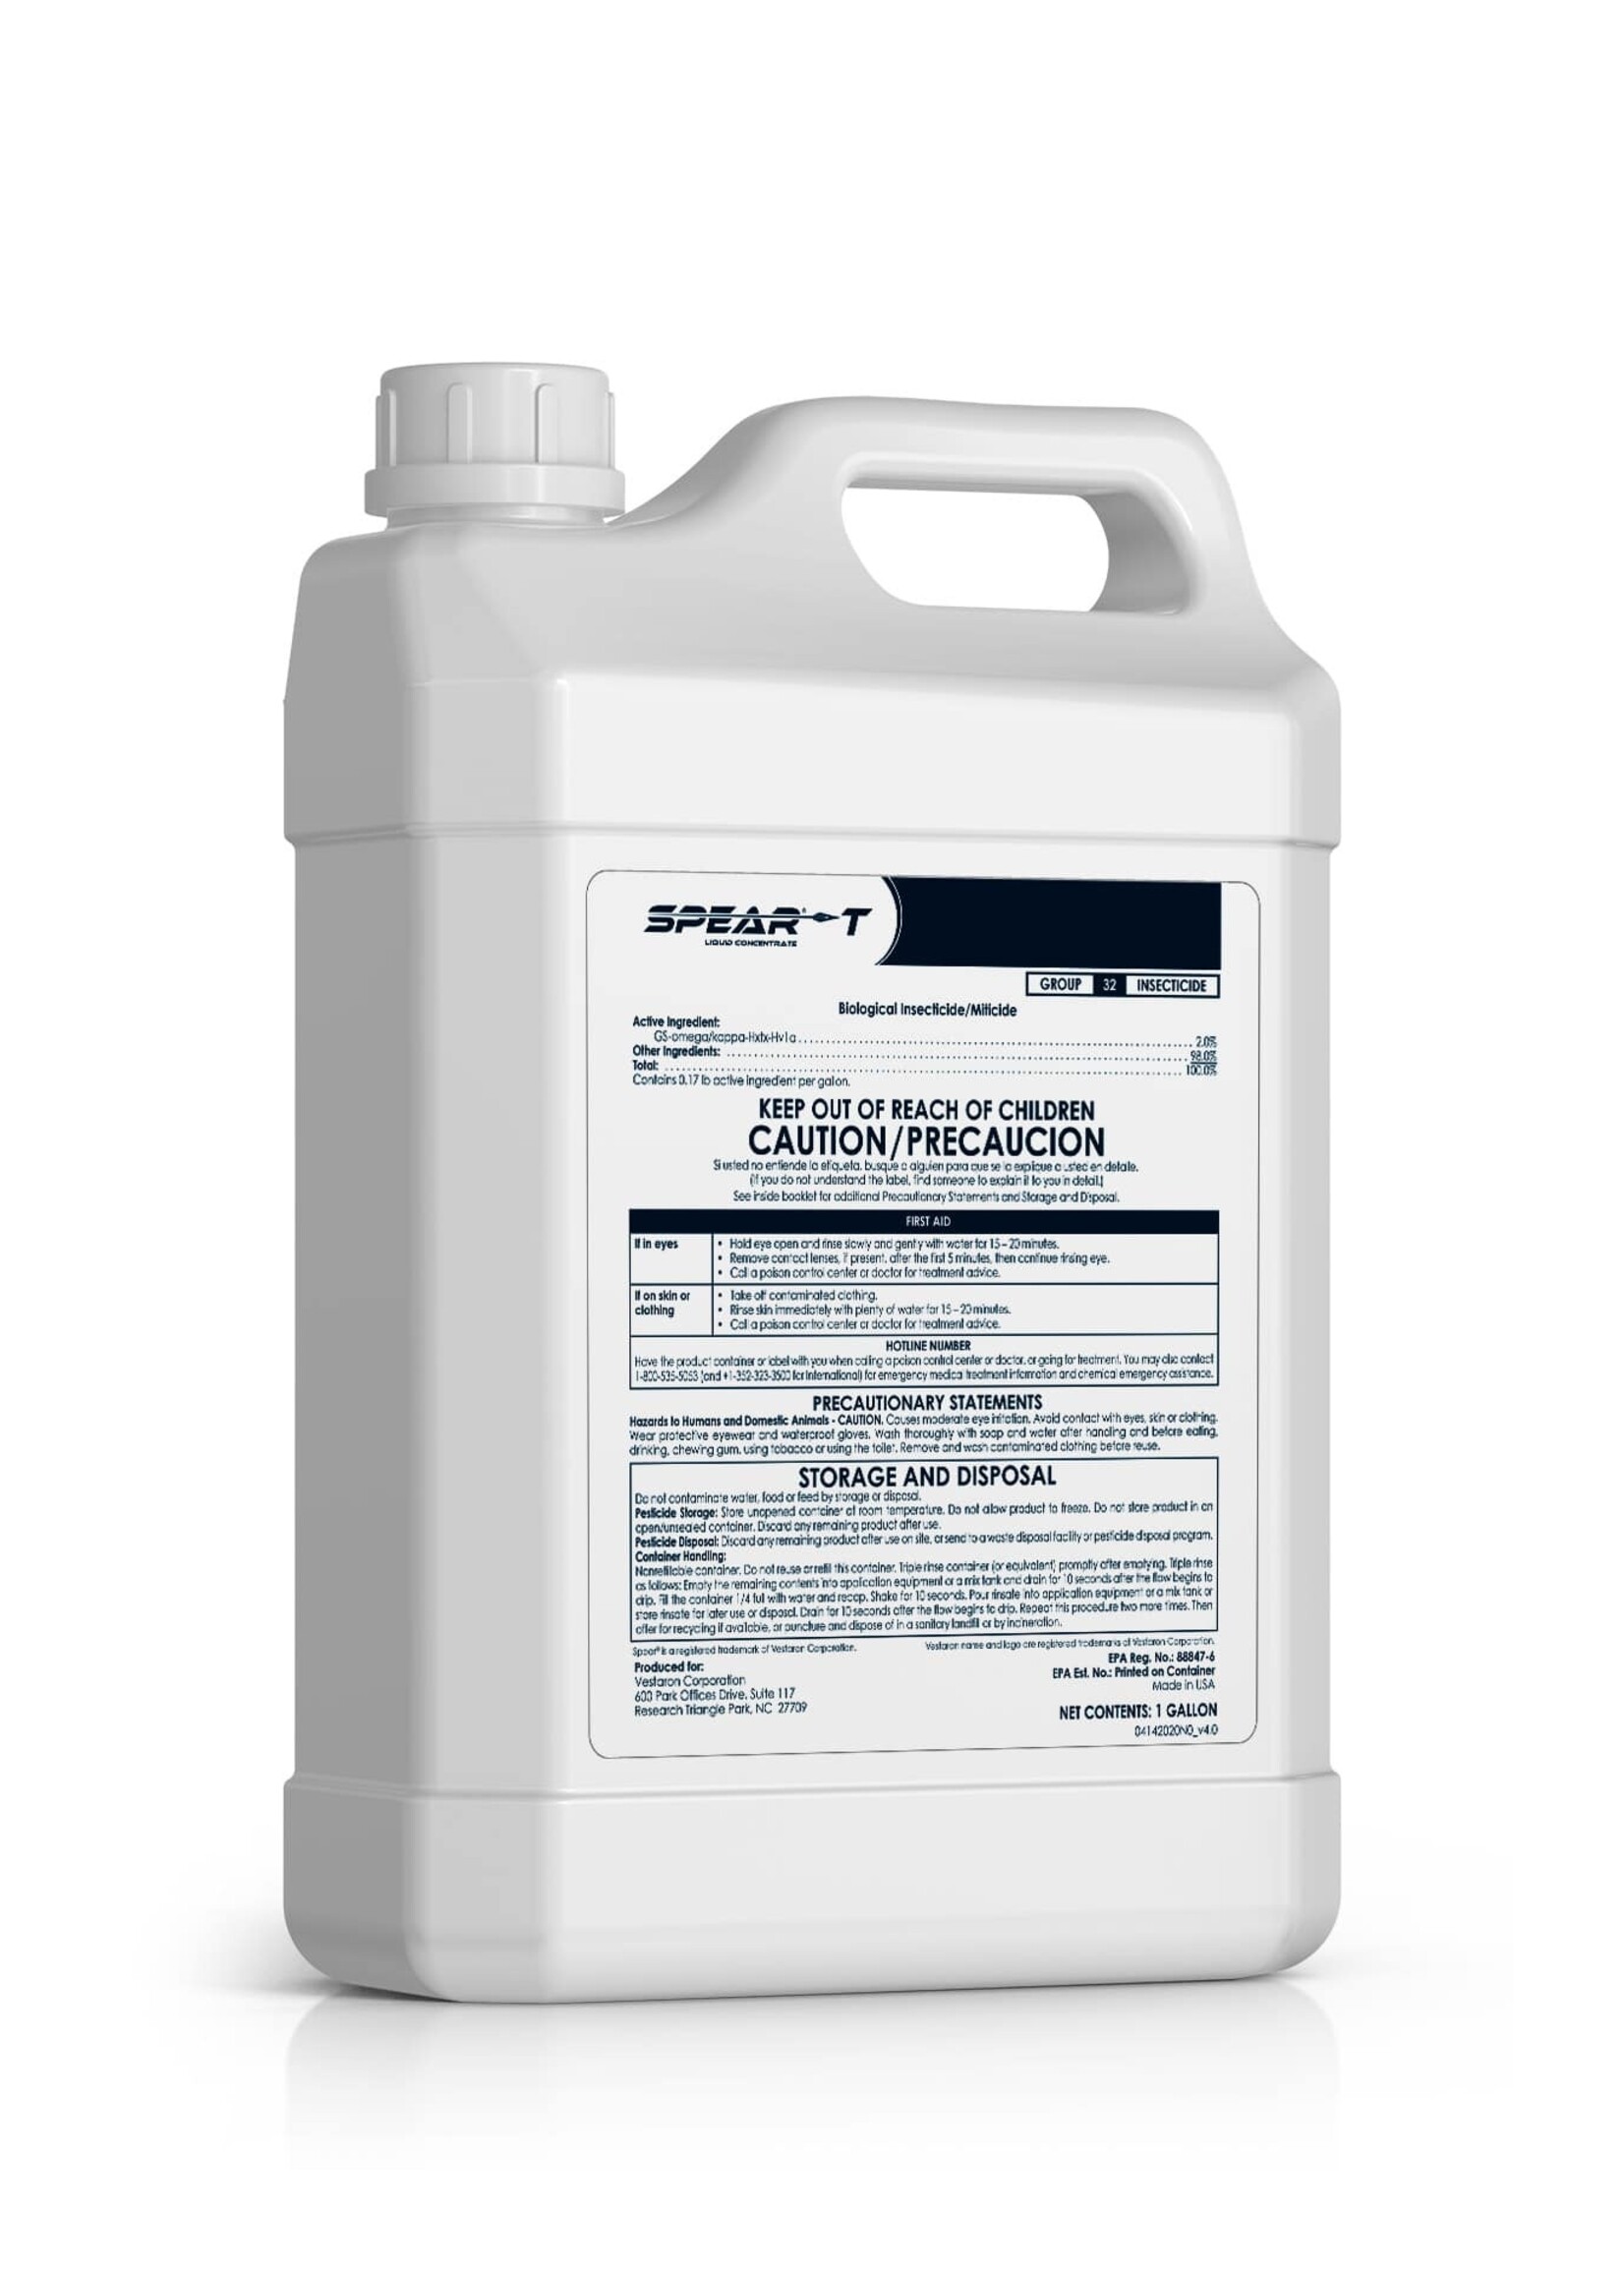 Spear-T Insecticide 1 Gal Jug